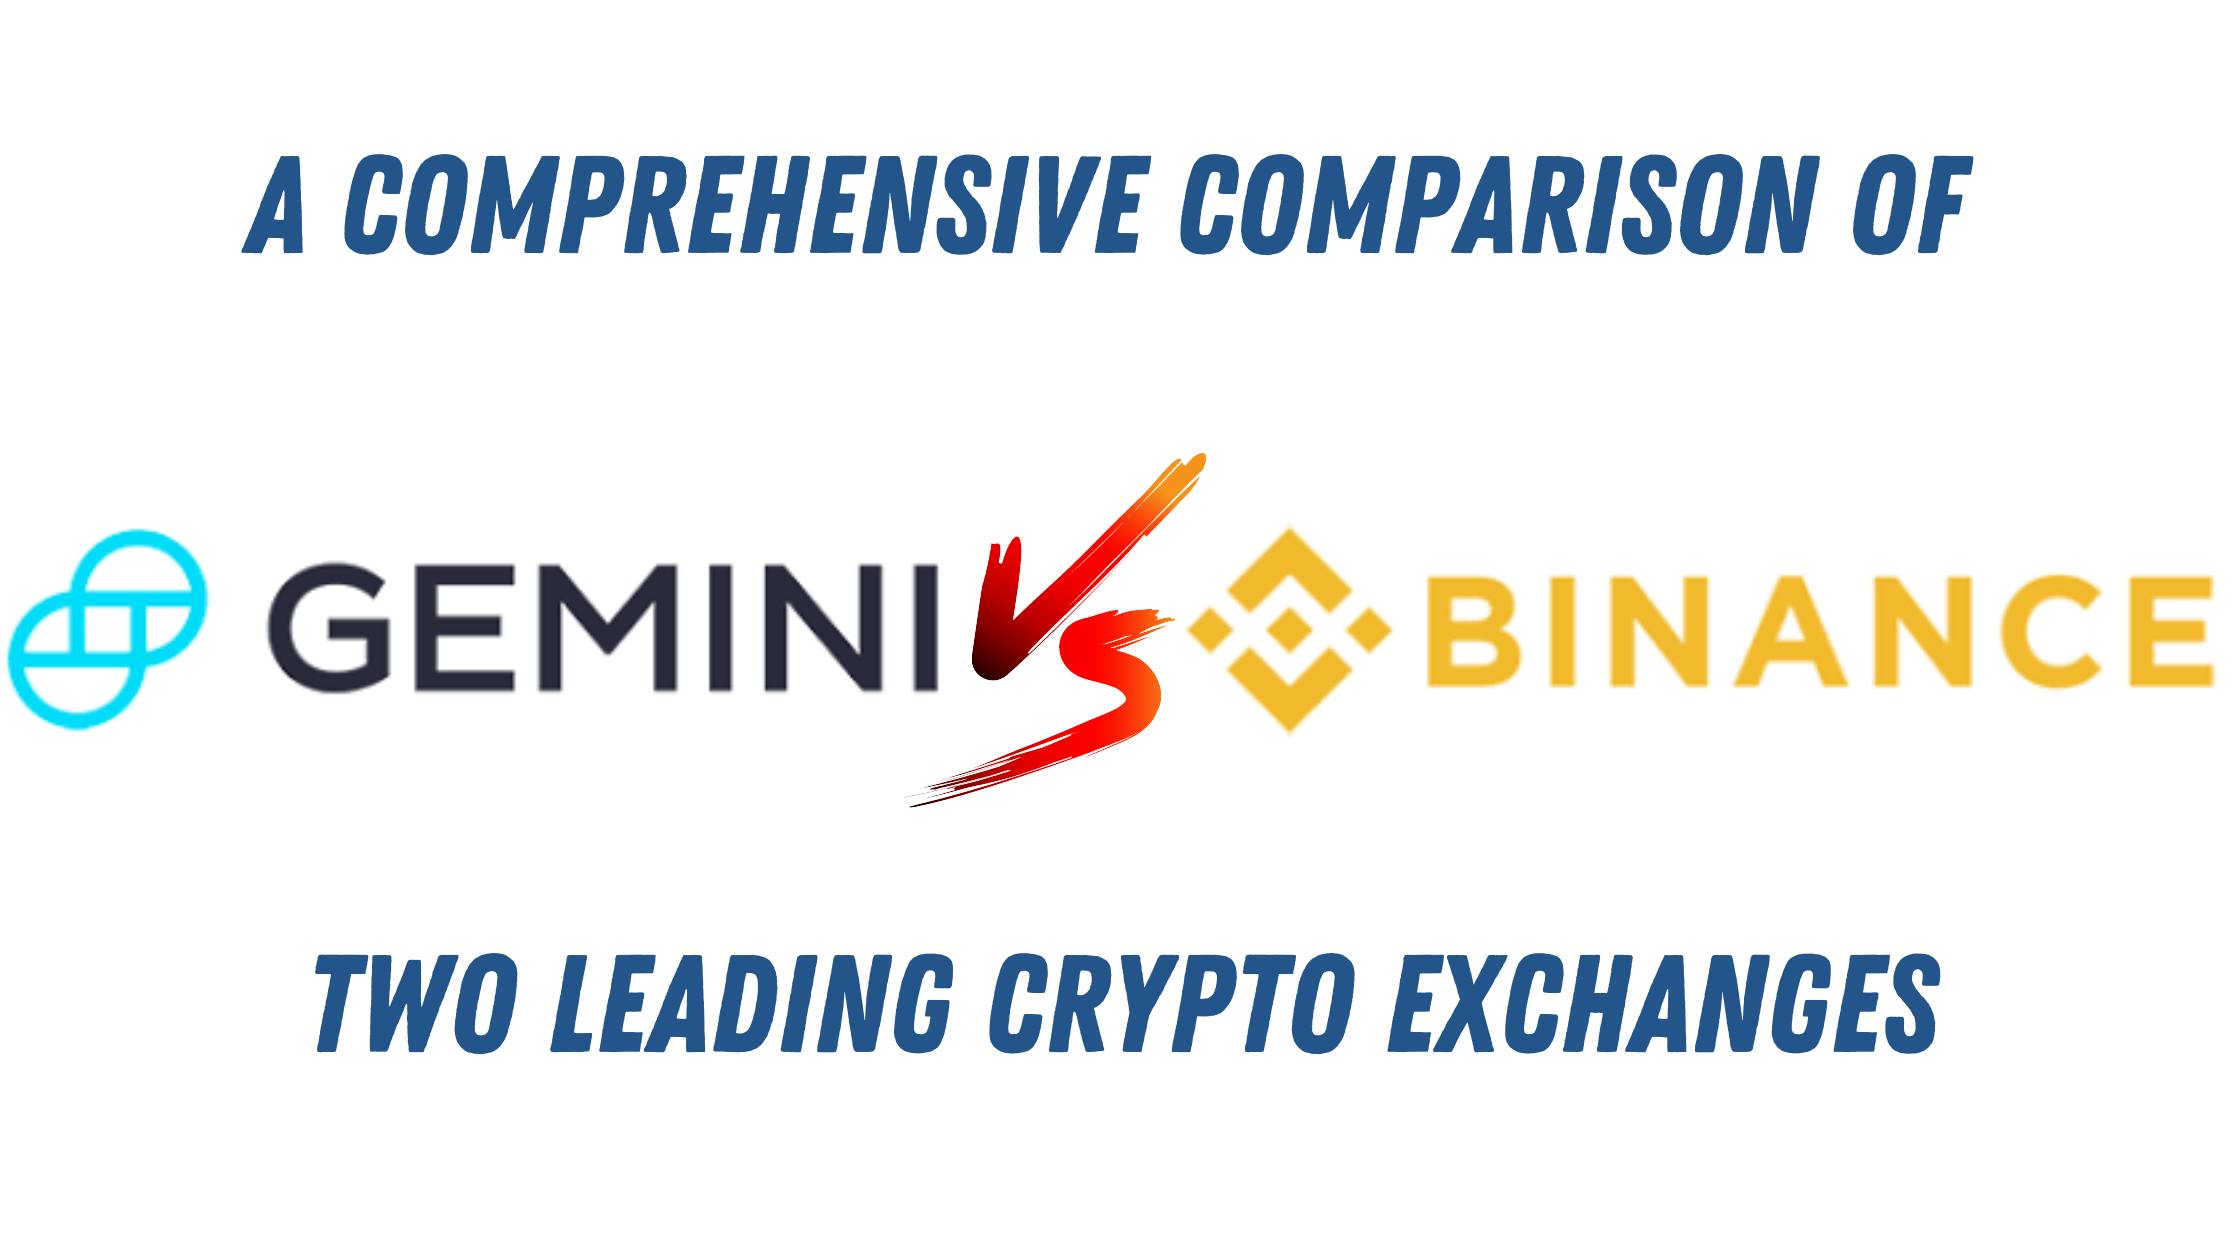 Gemini Vs Binance: A Comprehensive Comparison of Two Leading Crypto Exchanges